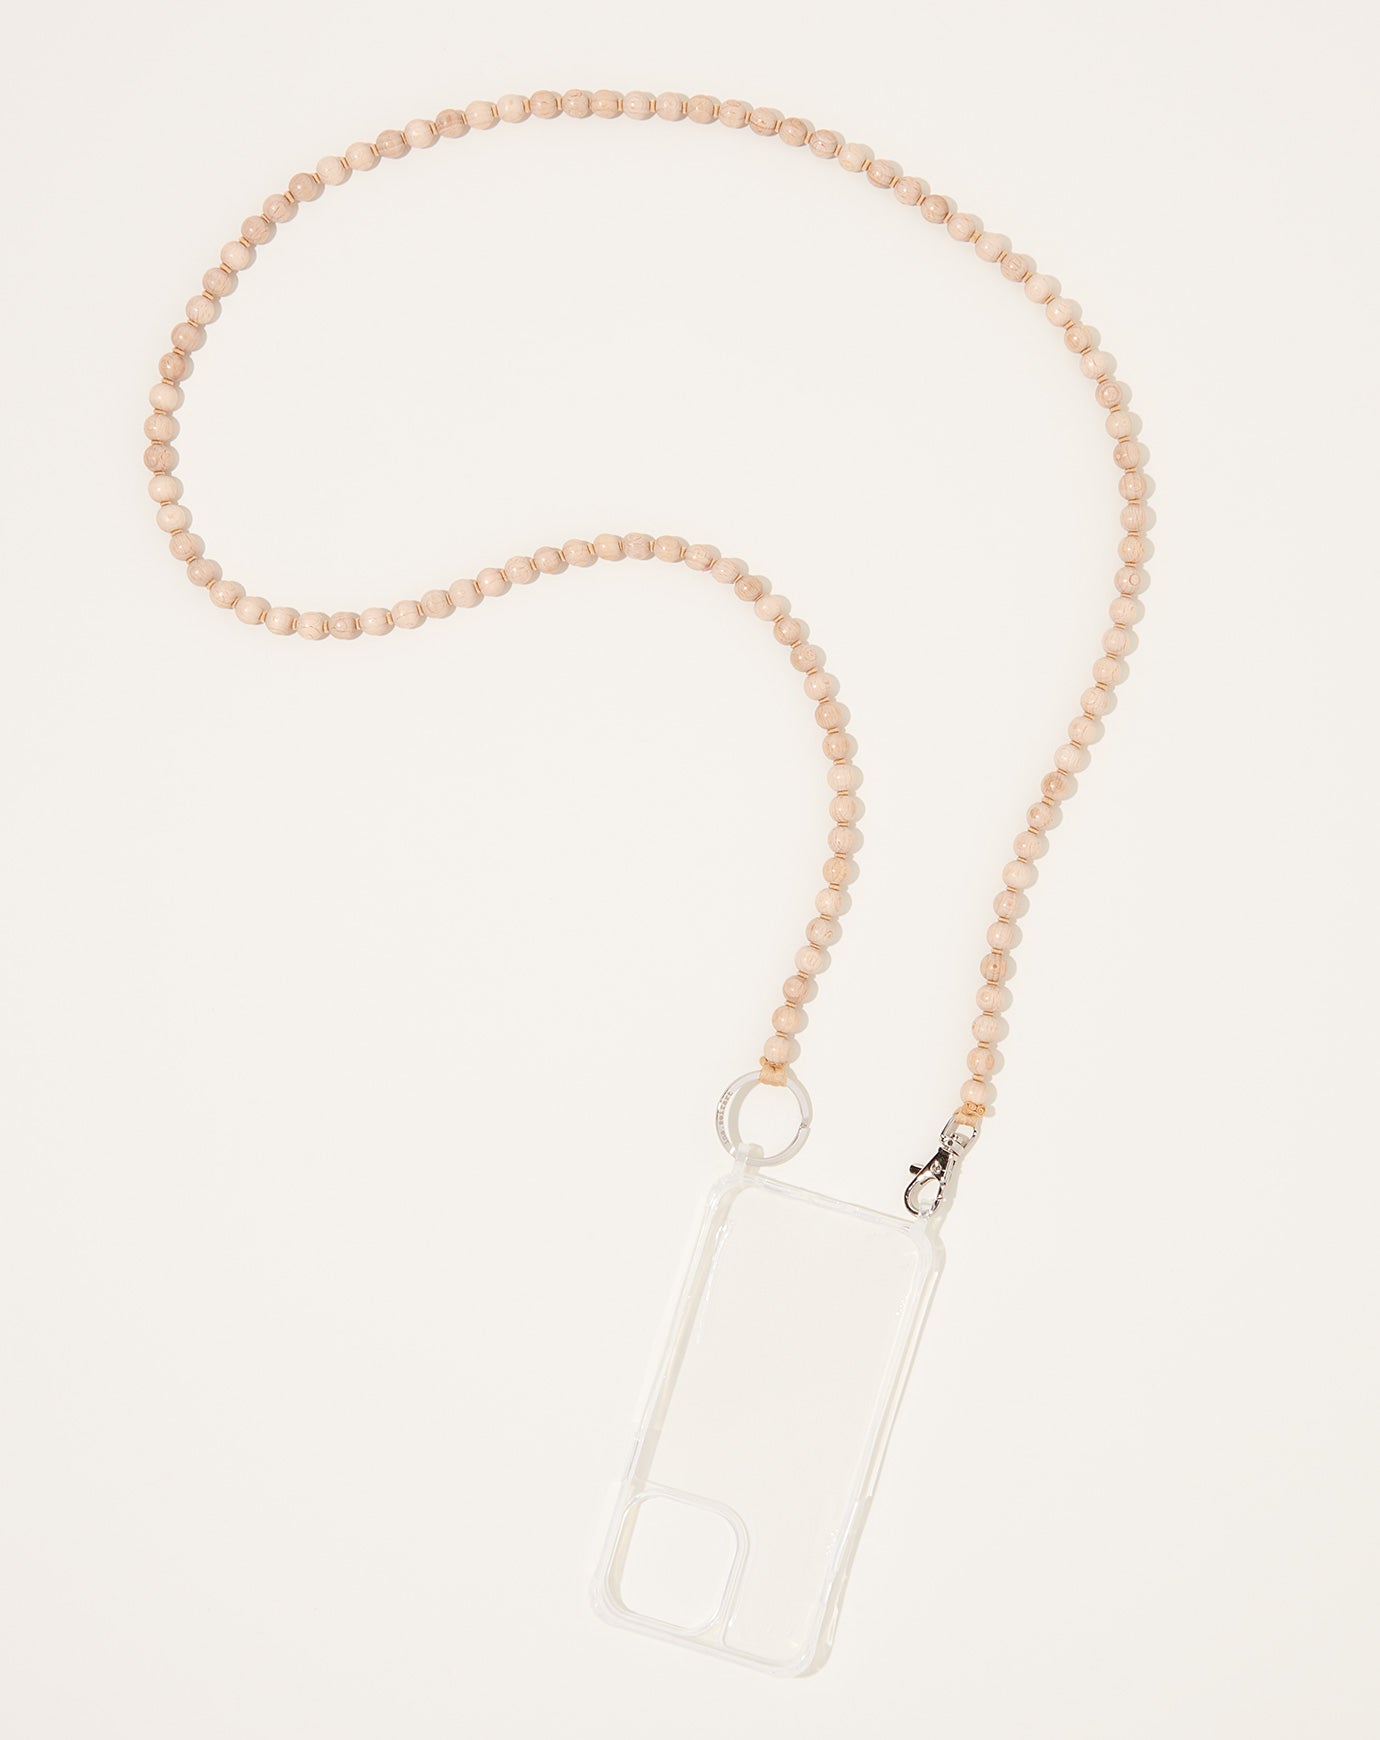 Ina Seifart Handykette iPhone Necklace in Natural on Beige